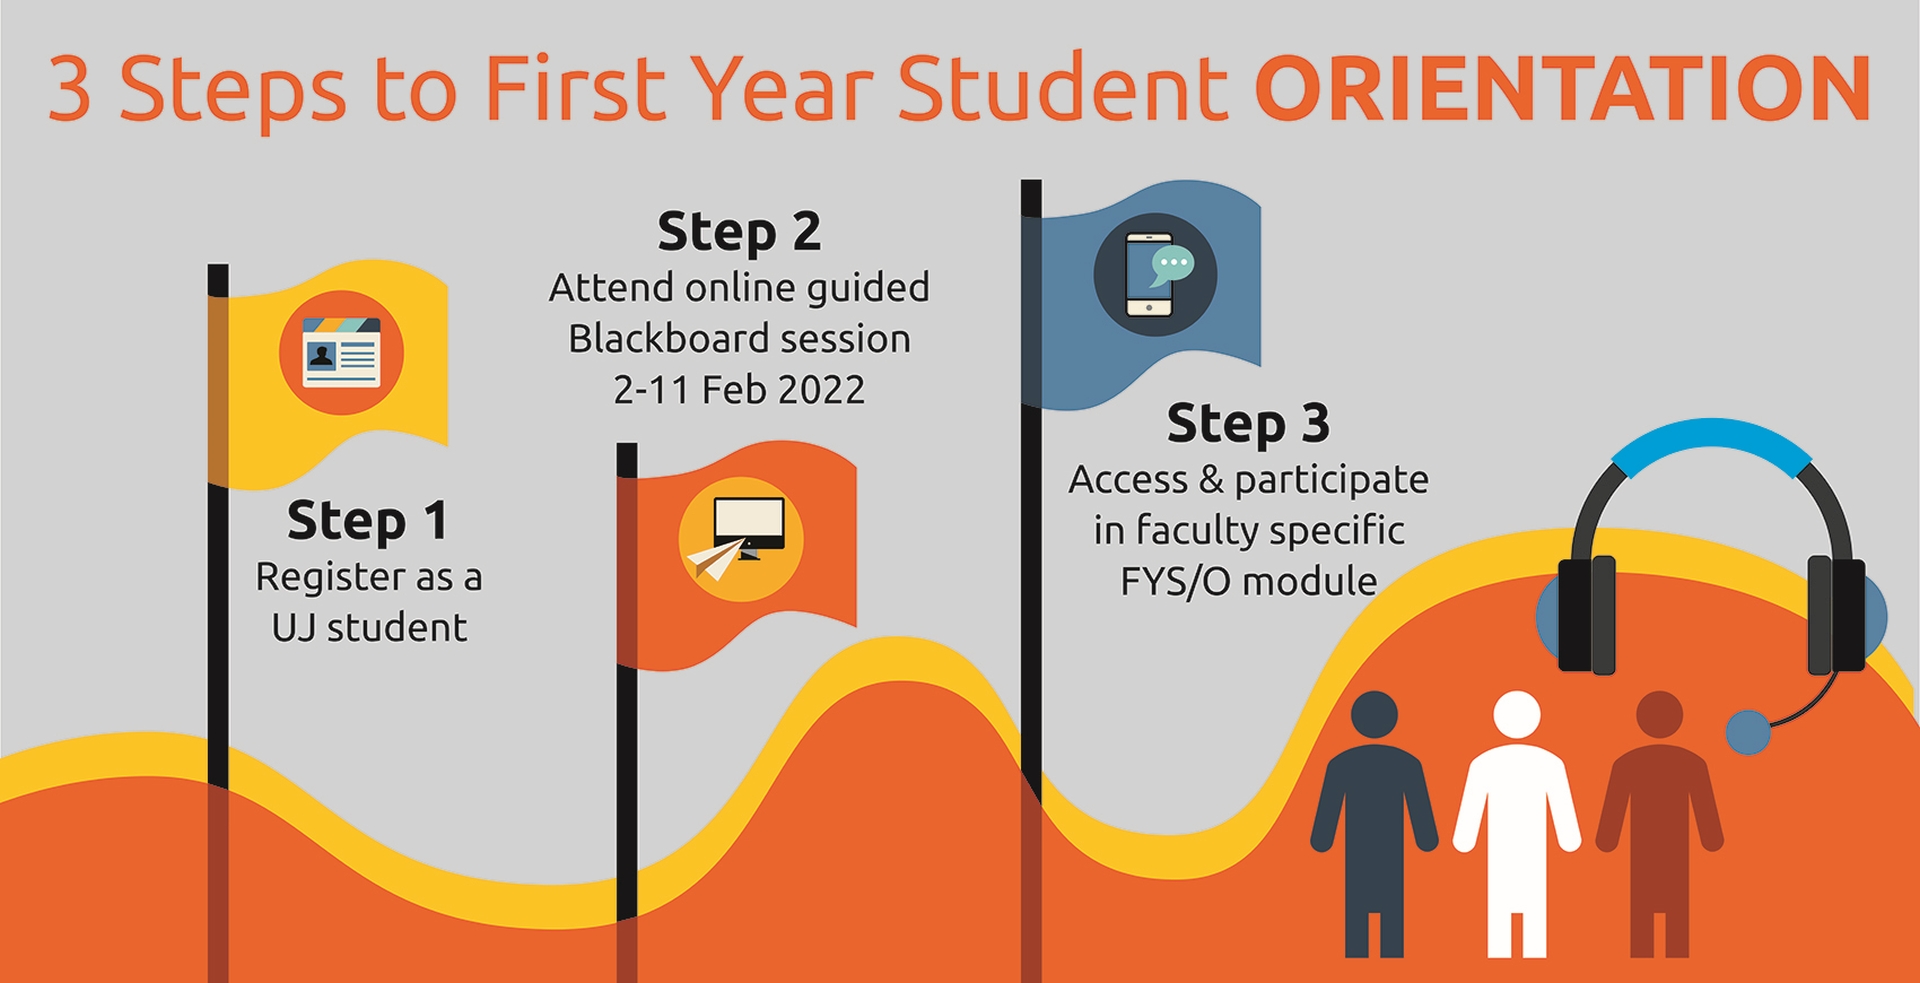 3 Steps to First Year Student Orientation